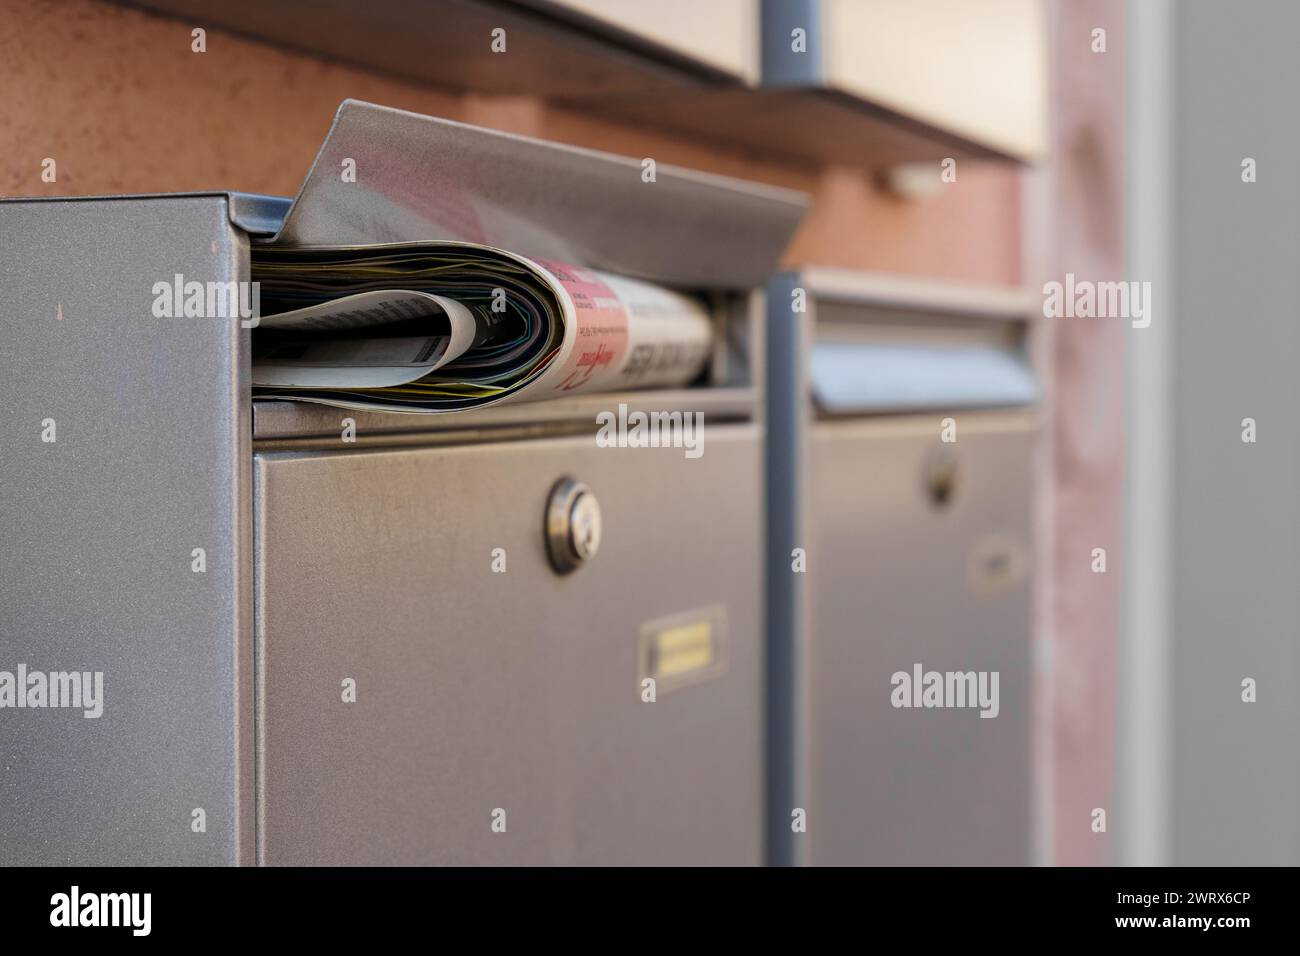 A mailbox filled with newspapers spilling out, indicating neglect or a lack of retrieval. Stock Photo